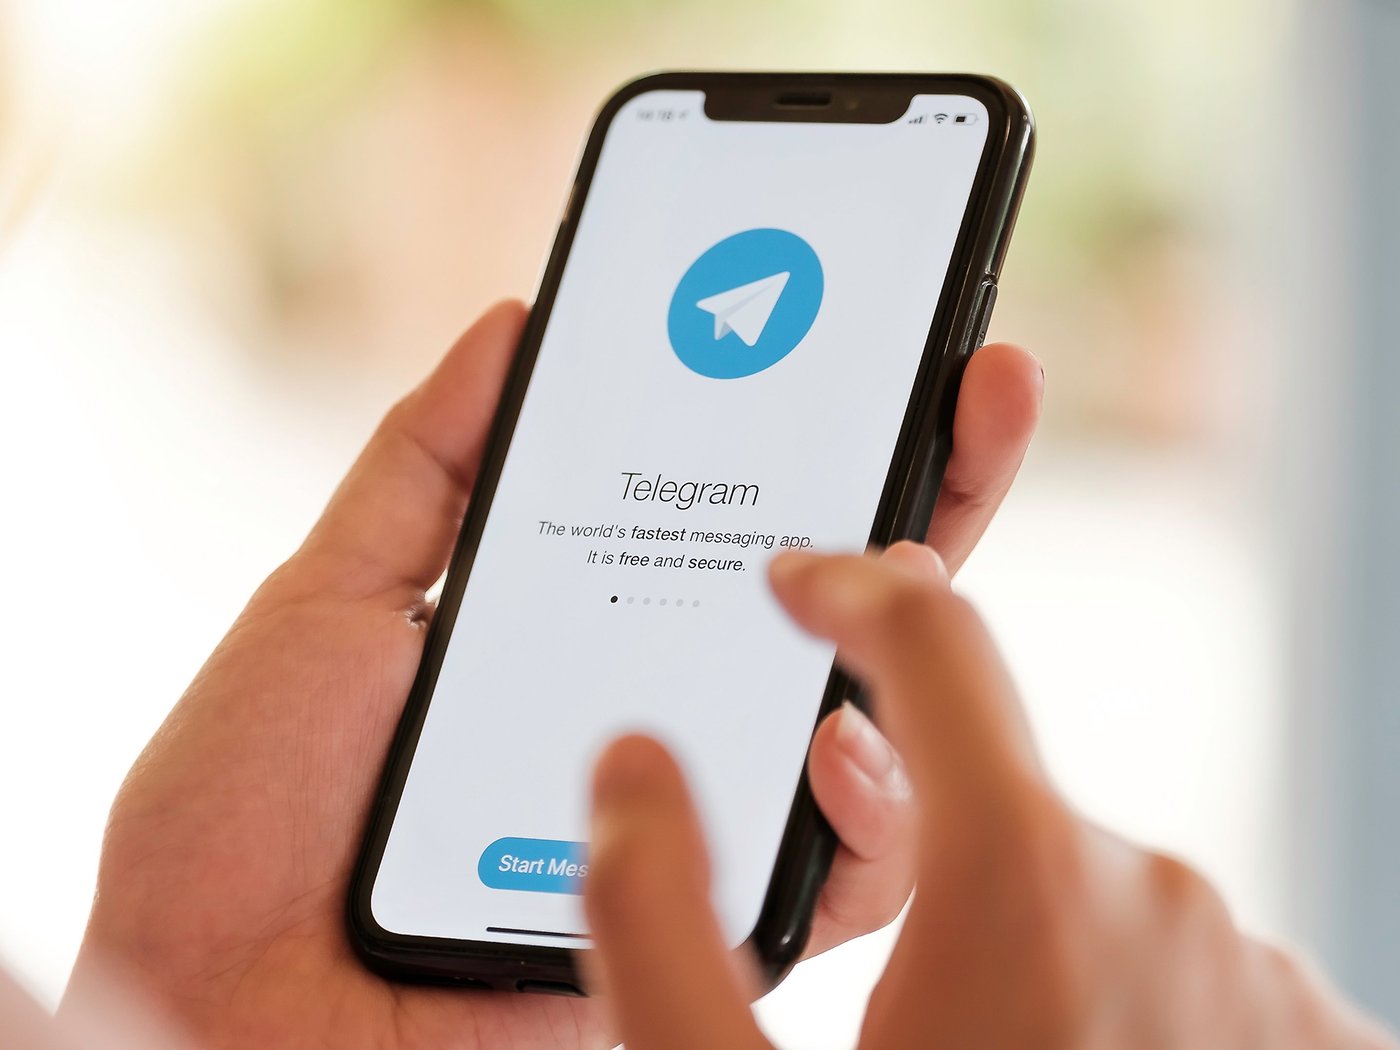 Telegram channels: How to find and join Telegram channels on